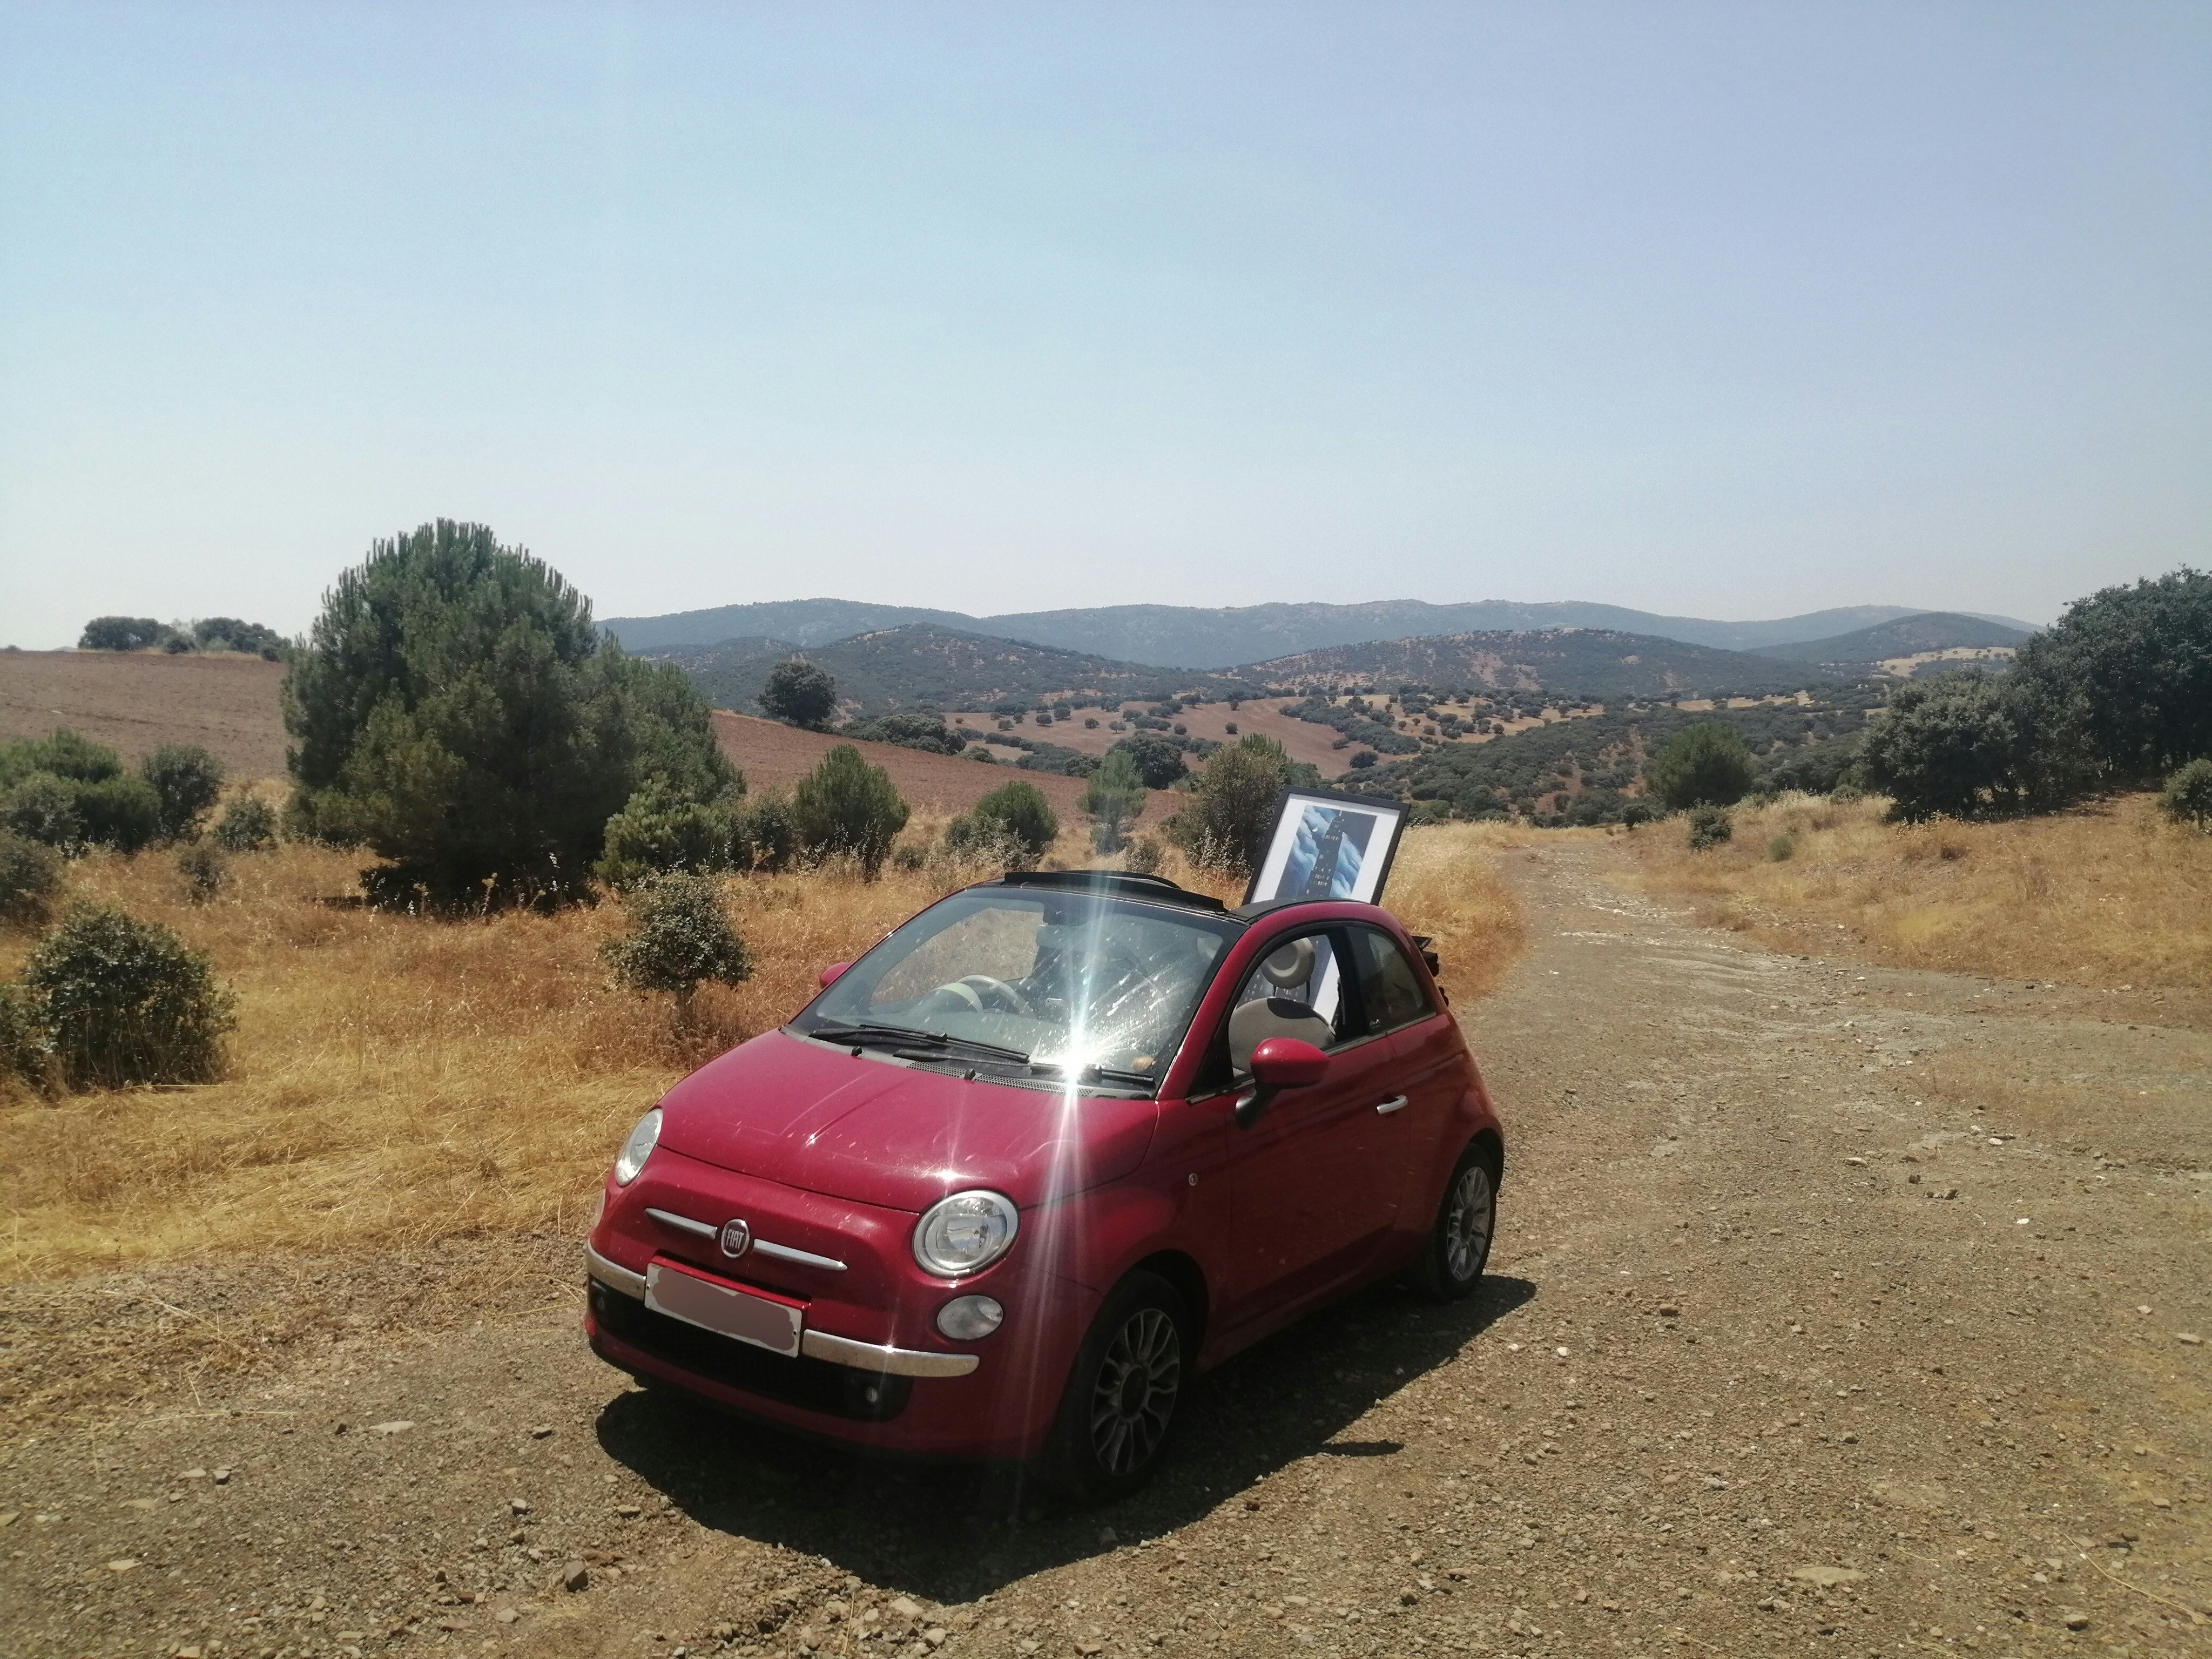 A red Fiat 500 convertible car on a dusty road in the sunshine, with a painting sticking out through the roof 